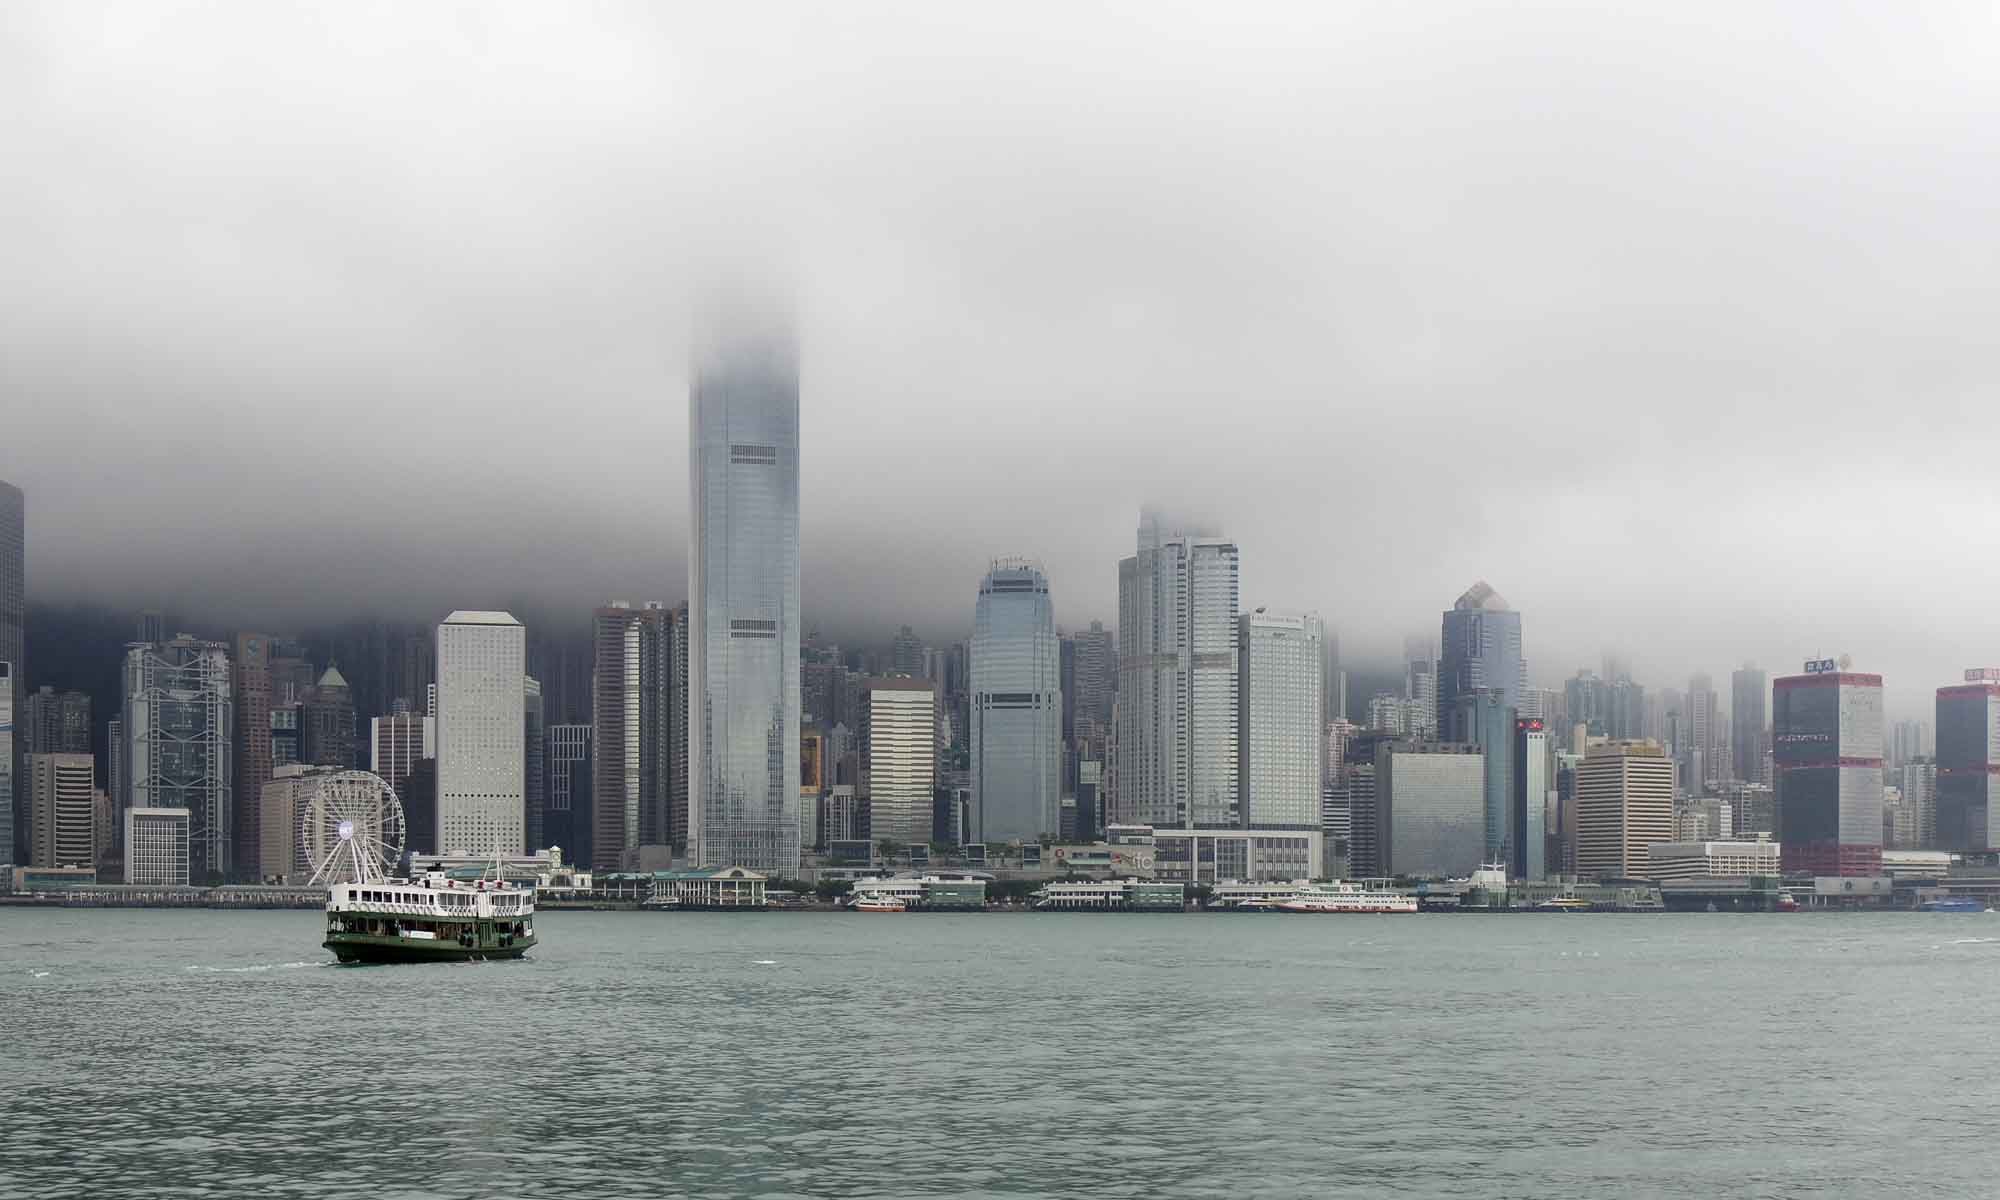 Viewed from Kowloon: Hong Kong Island in the clouds